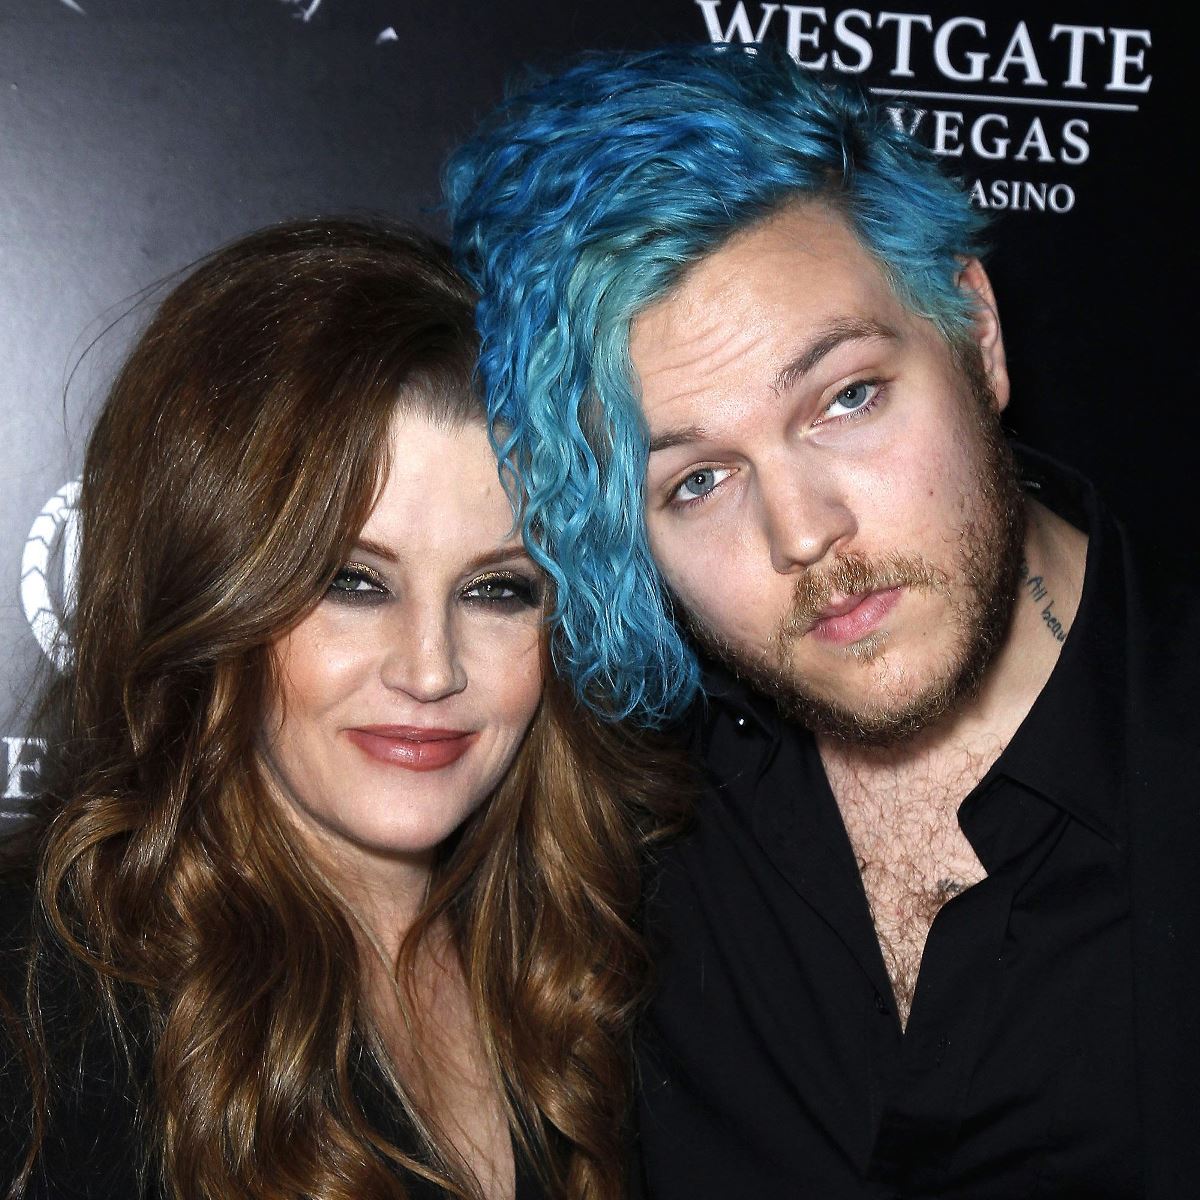 Lisa Marie Presley with her son Benjamin Keough